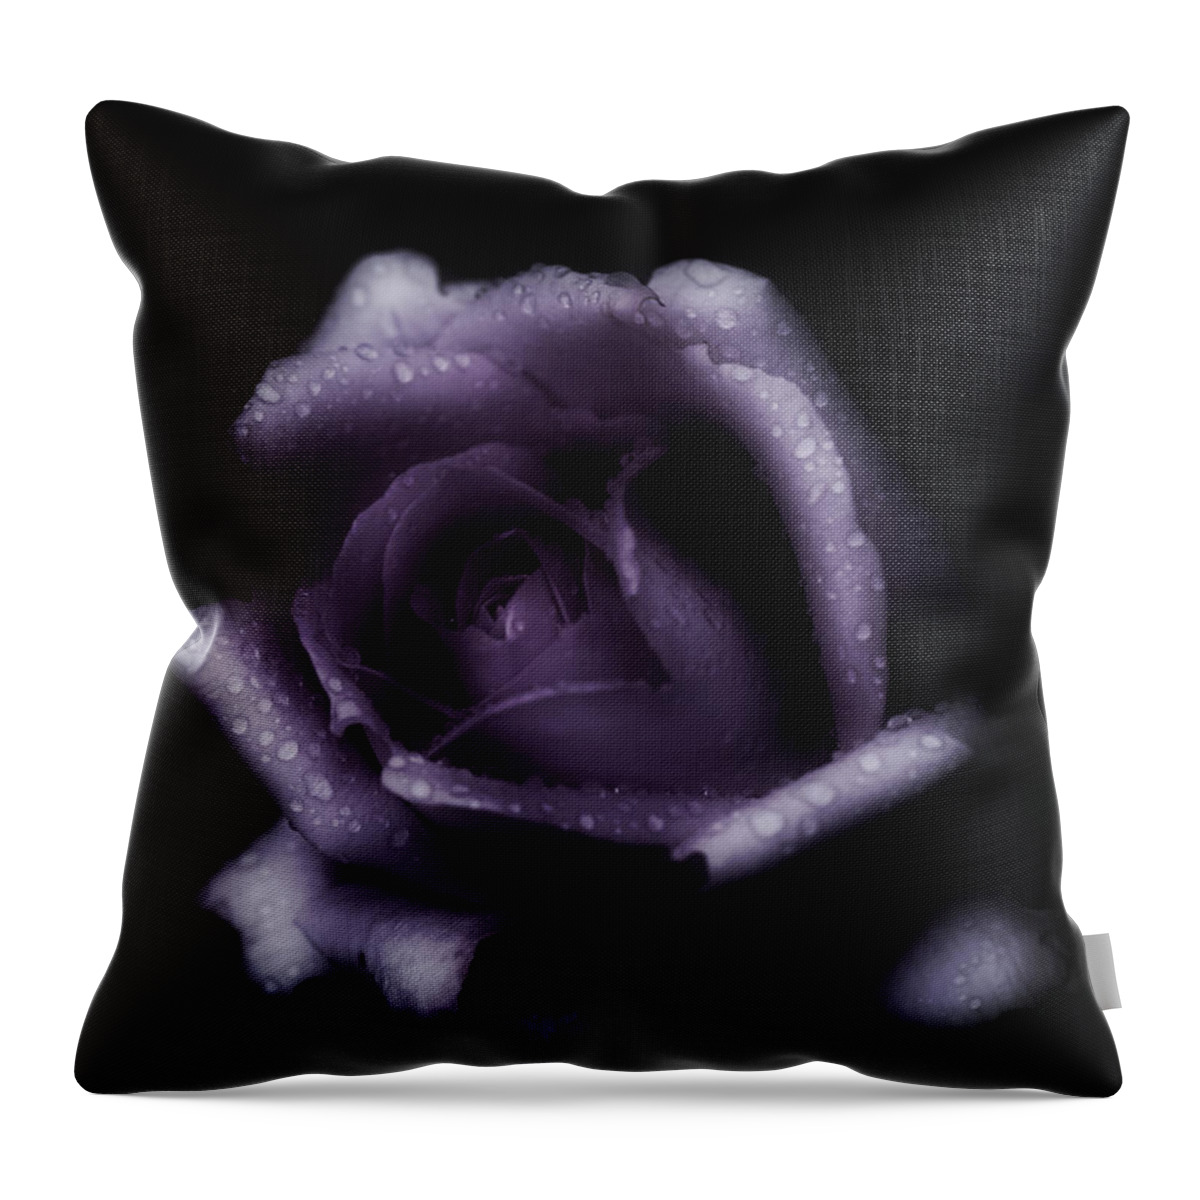 Purple Rose Throw Pillow featuring the photograph Romantic Purple Rose by Richard Cummings